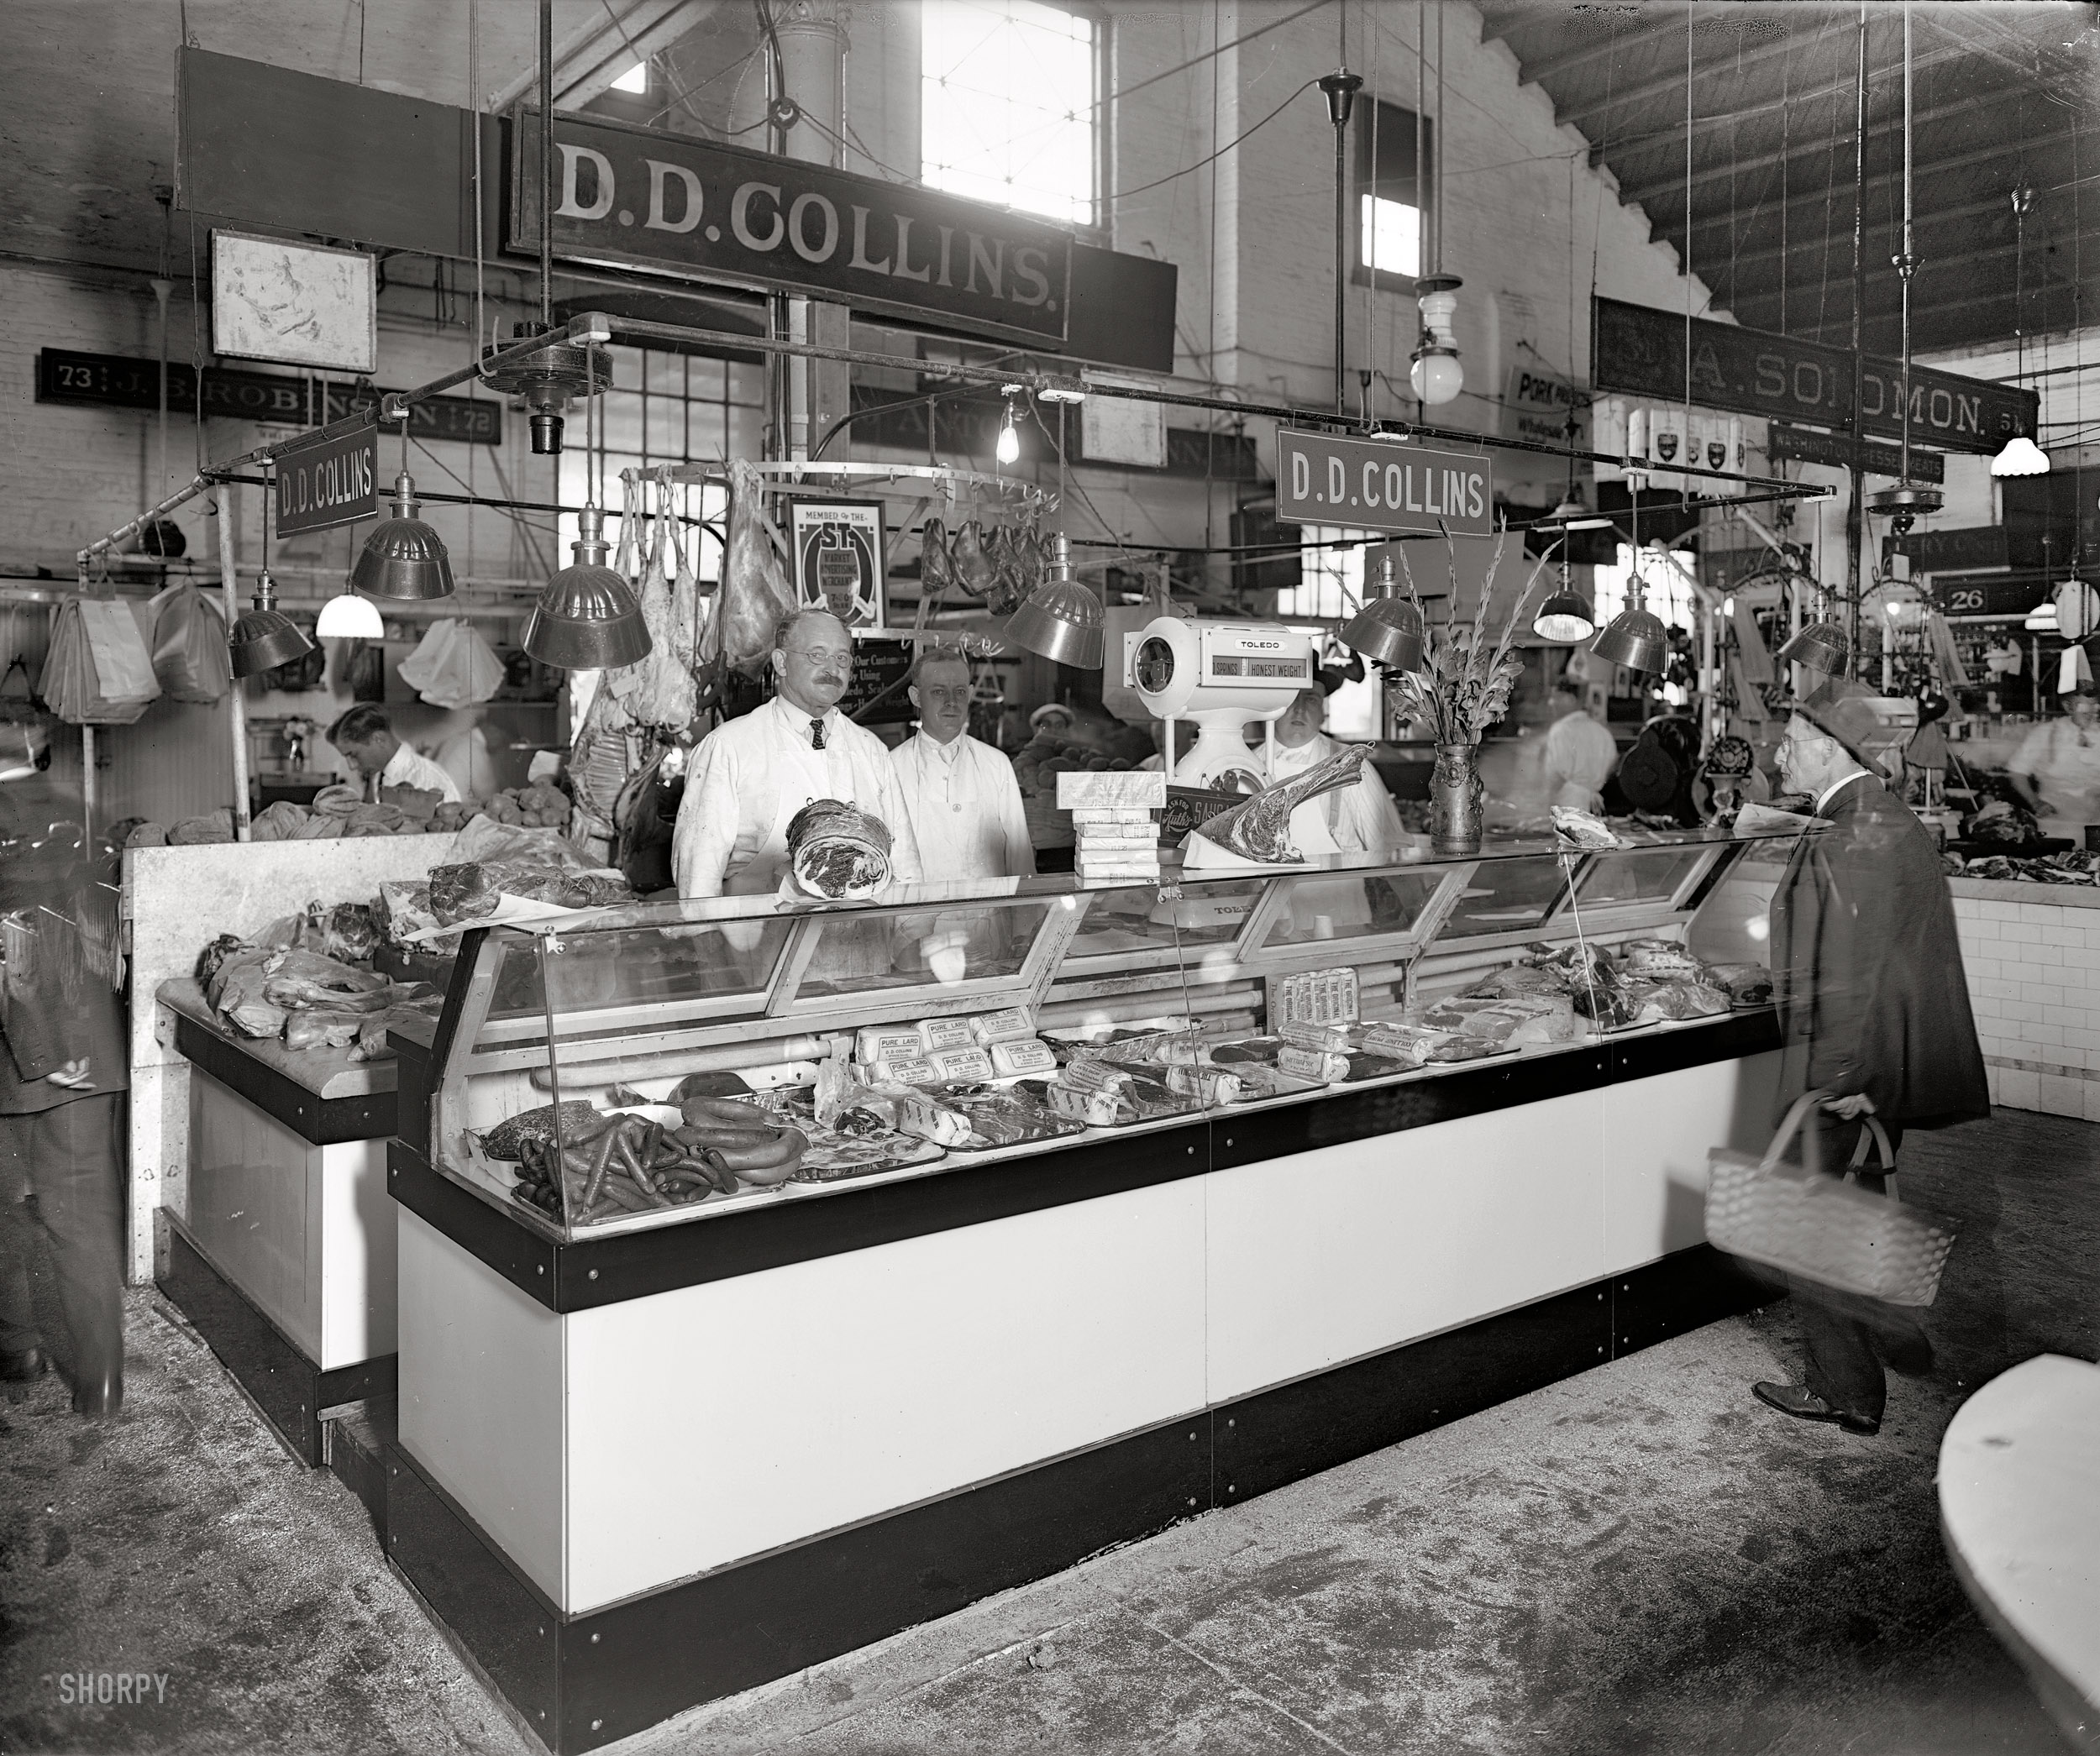 Washington, D.C., circa 1925. "D.D. Collins." Meat counter at the O Street Market, 7th and O streets N.W. National Photo Company glass negative. View full size.